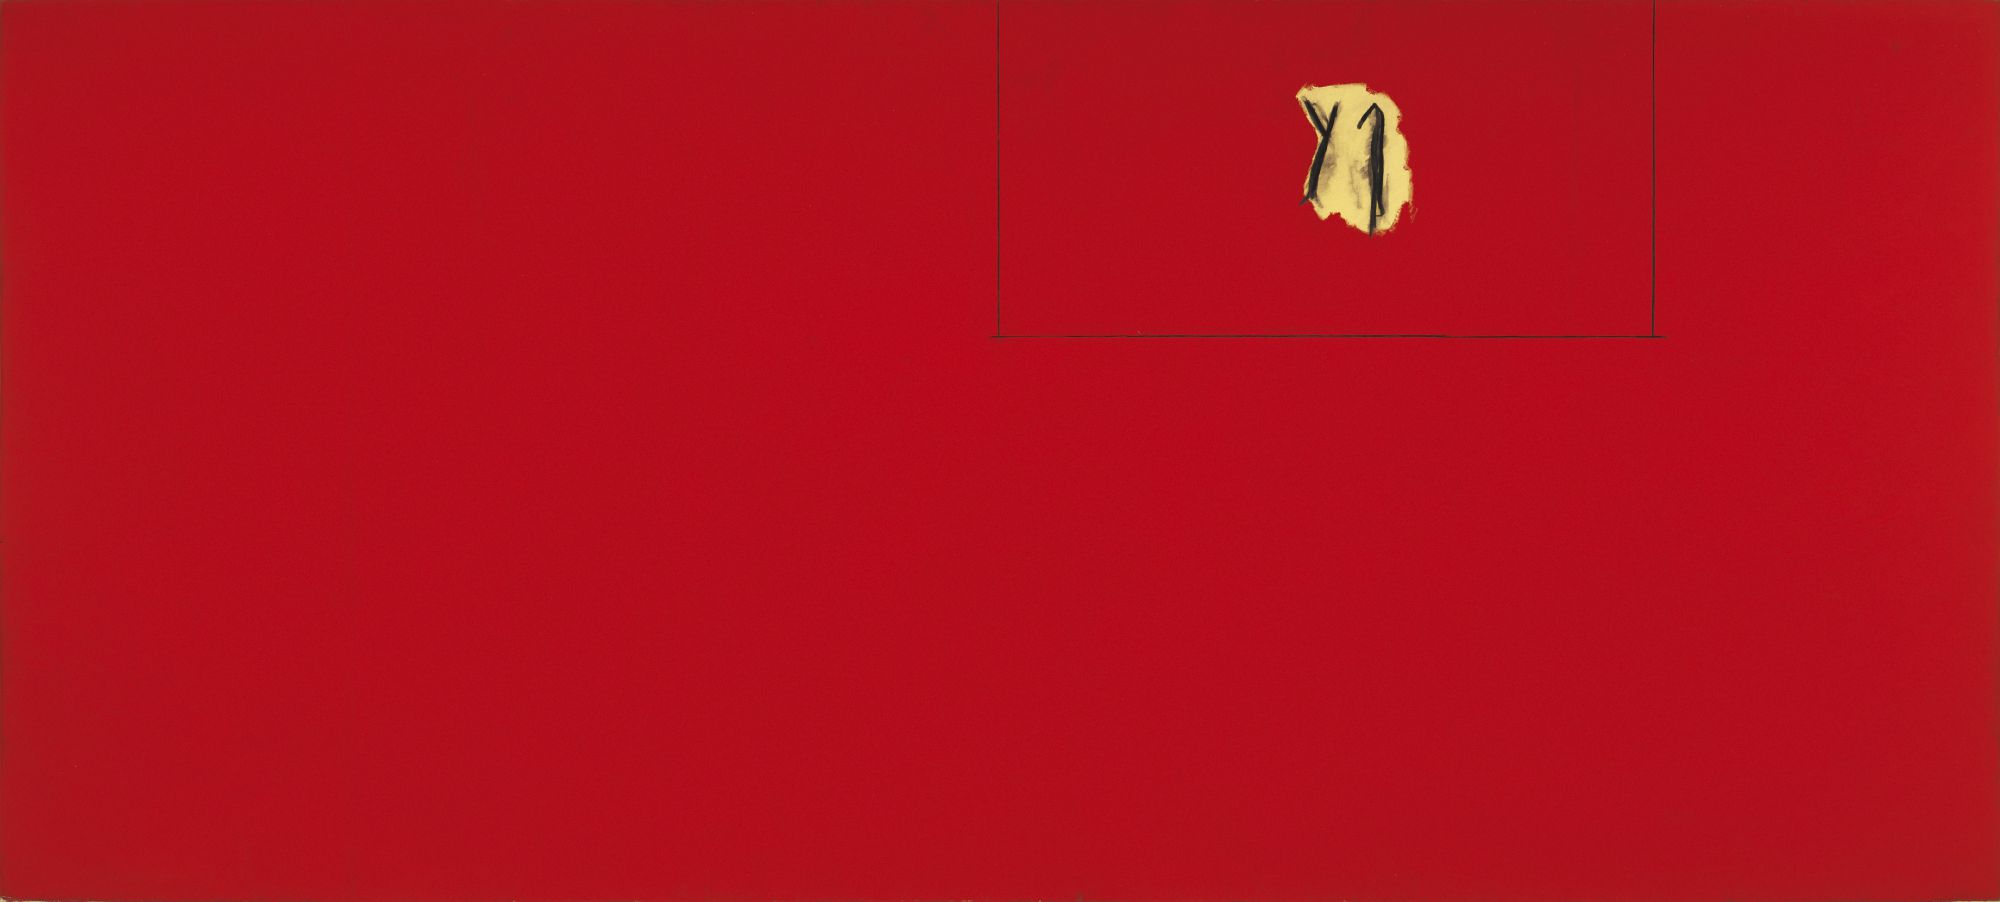 Phoenician Red Studio, 1977, acrylic and charcoal on canvas, 86 ✕ 192 in. (218.4 ✕ 487.7 cm)